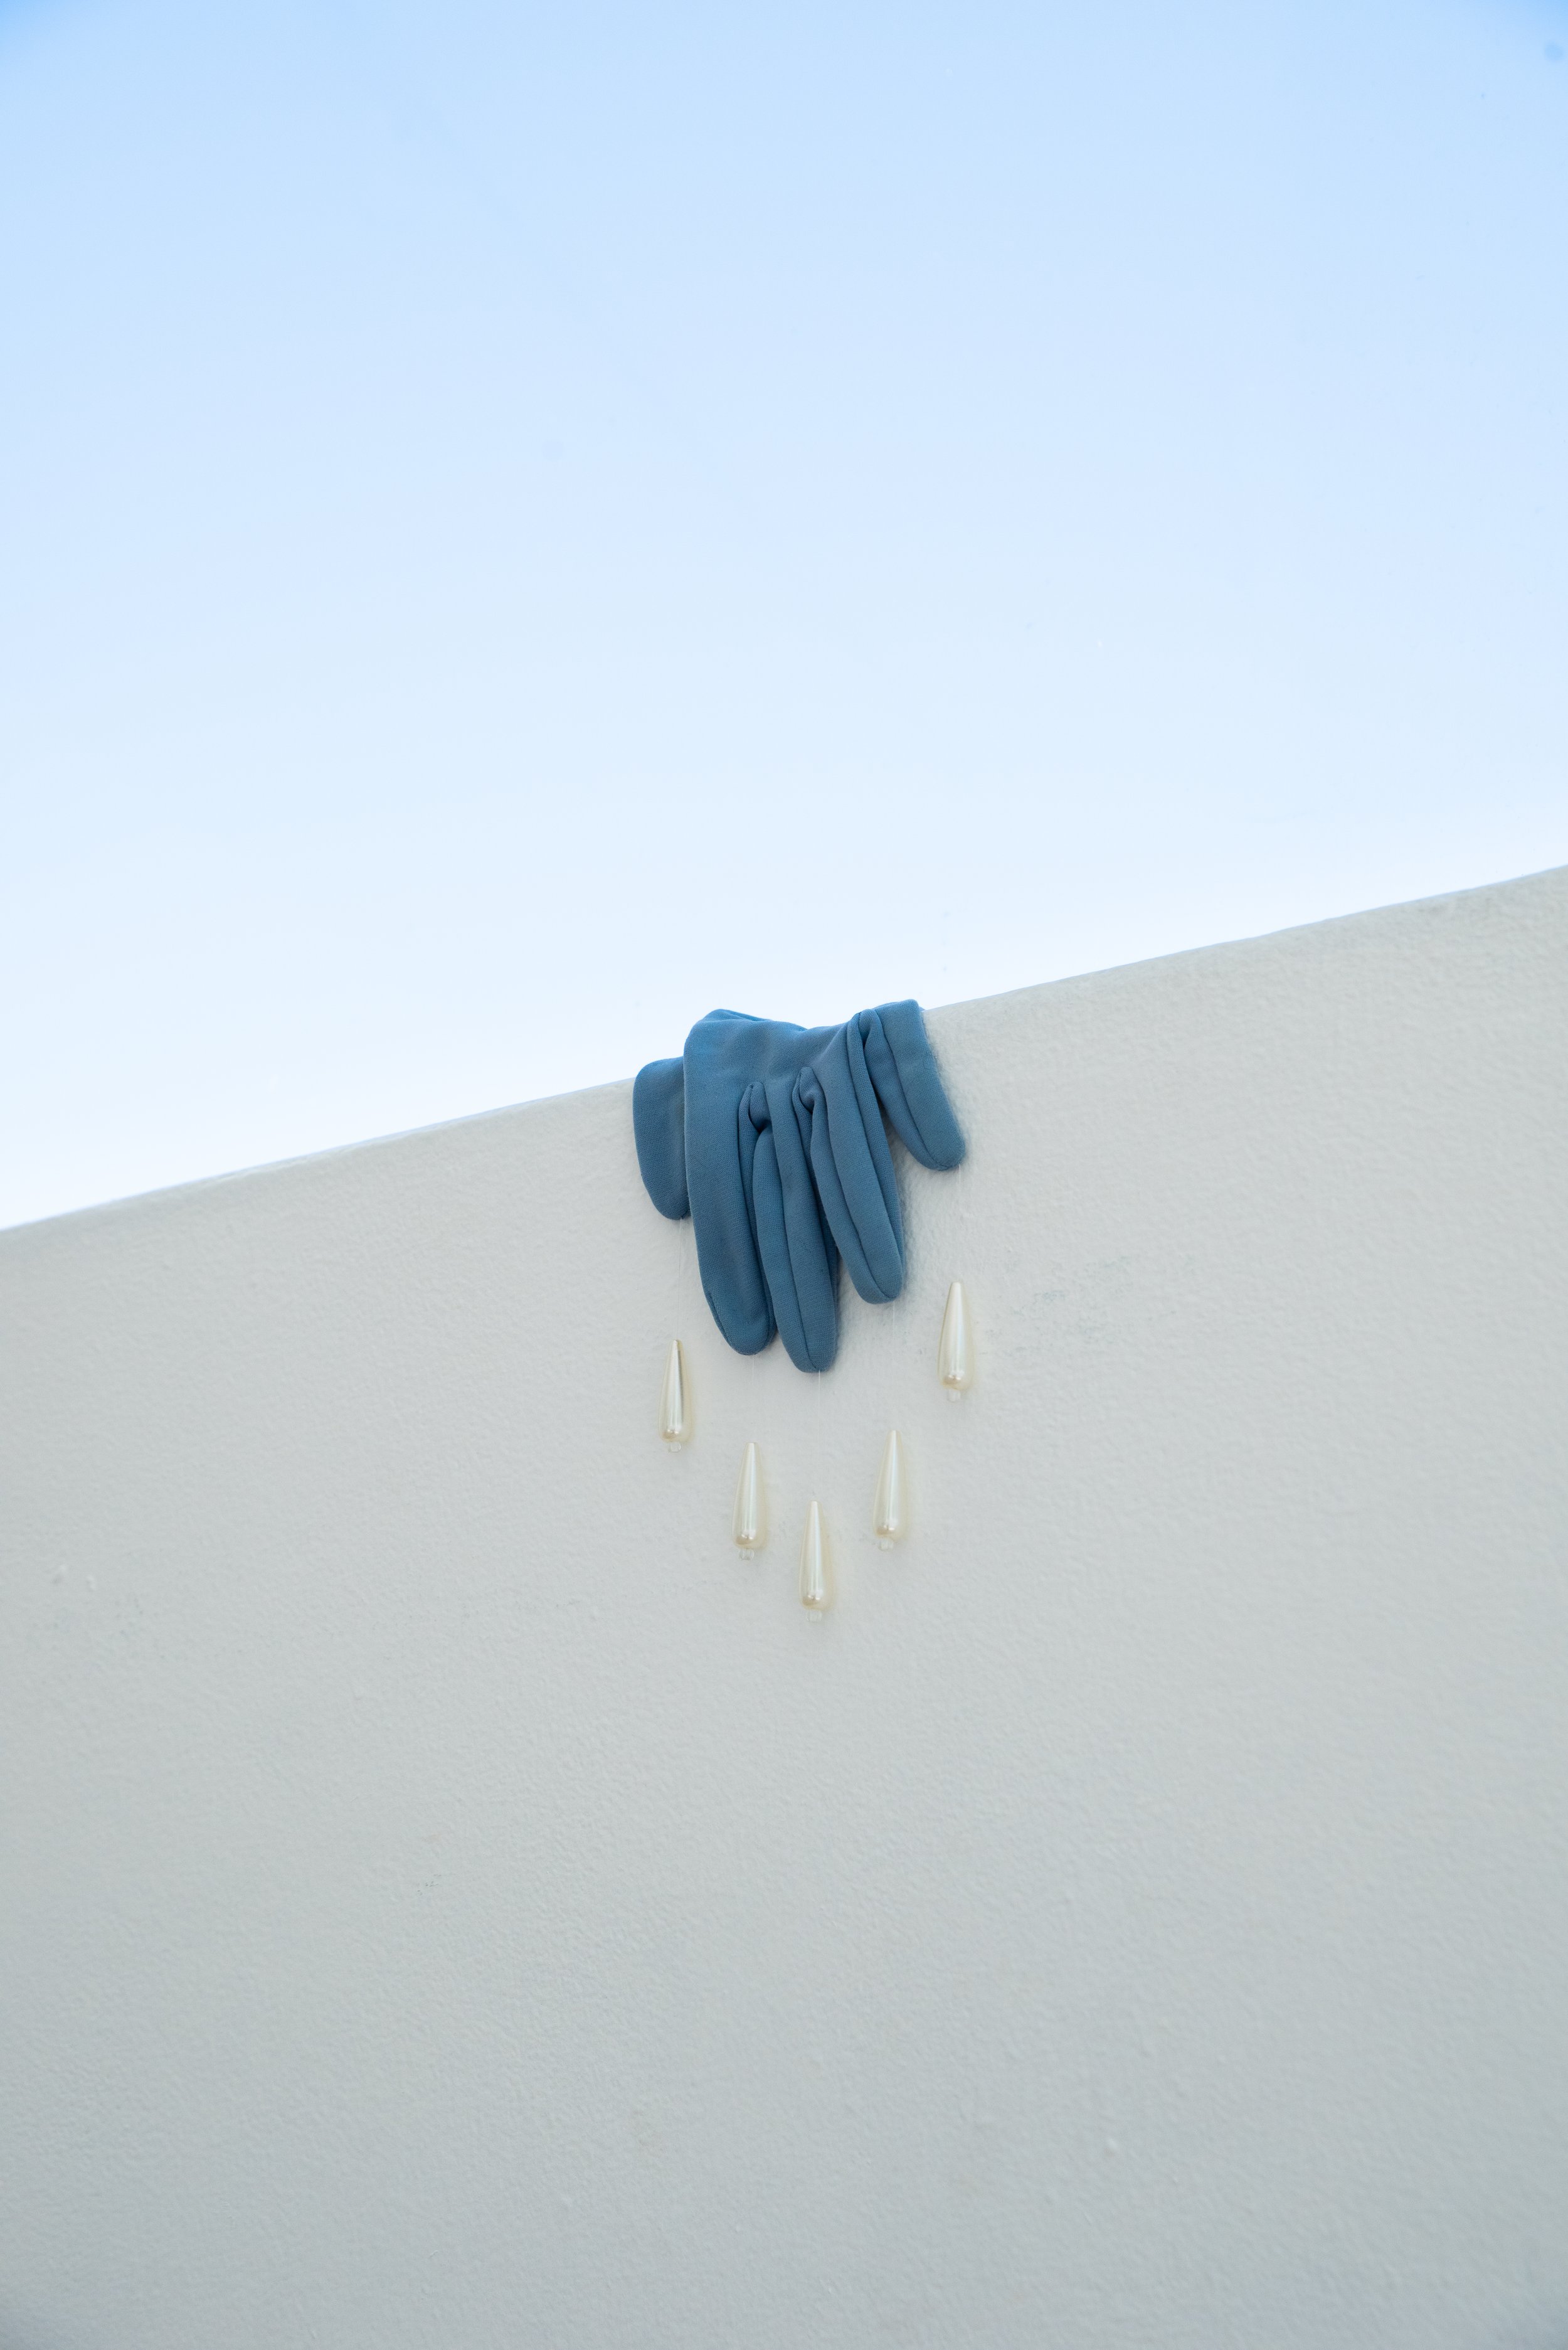  Mambo No. 7  Second-hand gloves, synthetic beads and cotton thread  9 x 40cm  2022  Photograph by Samantha Iliov  